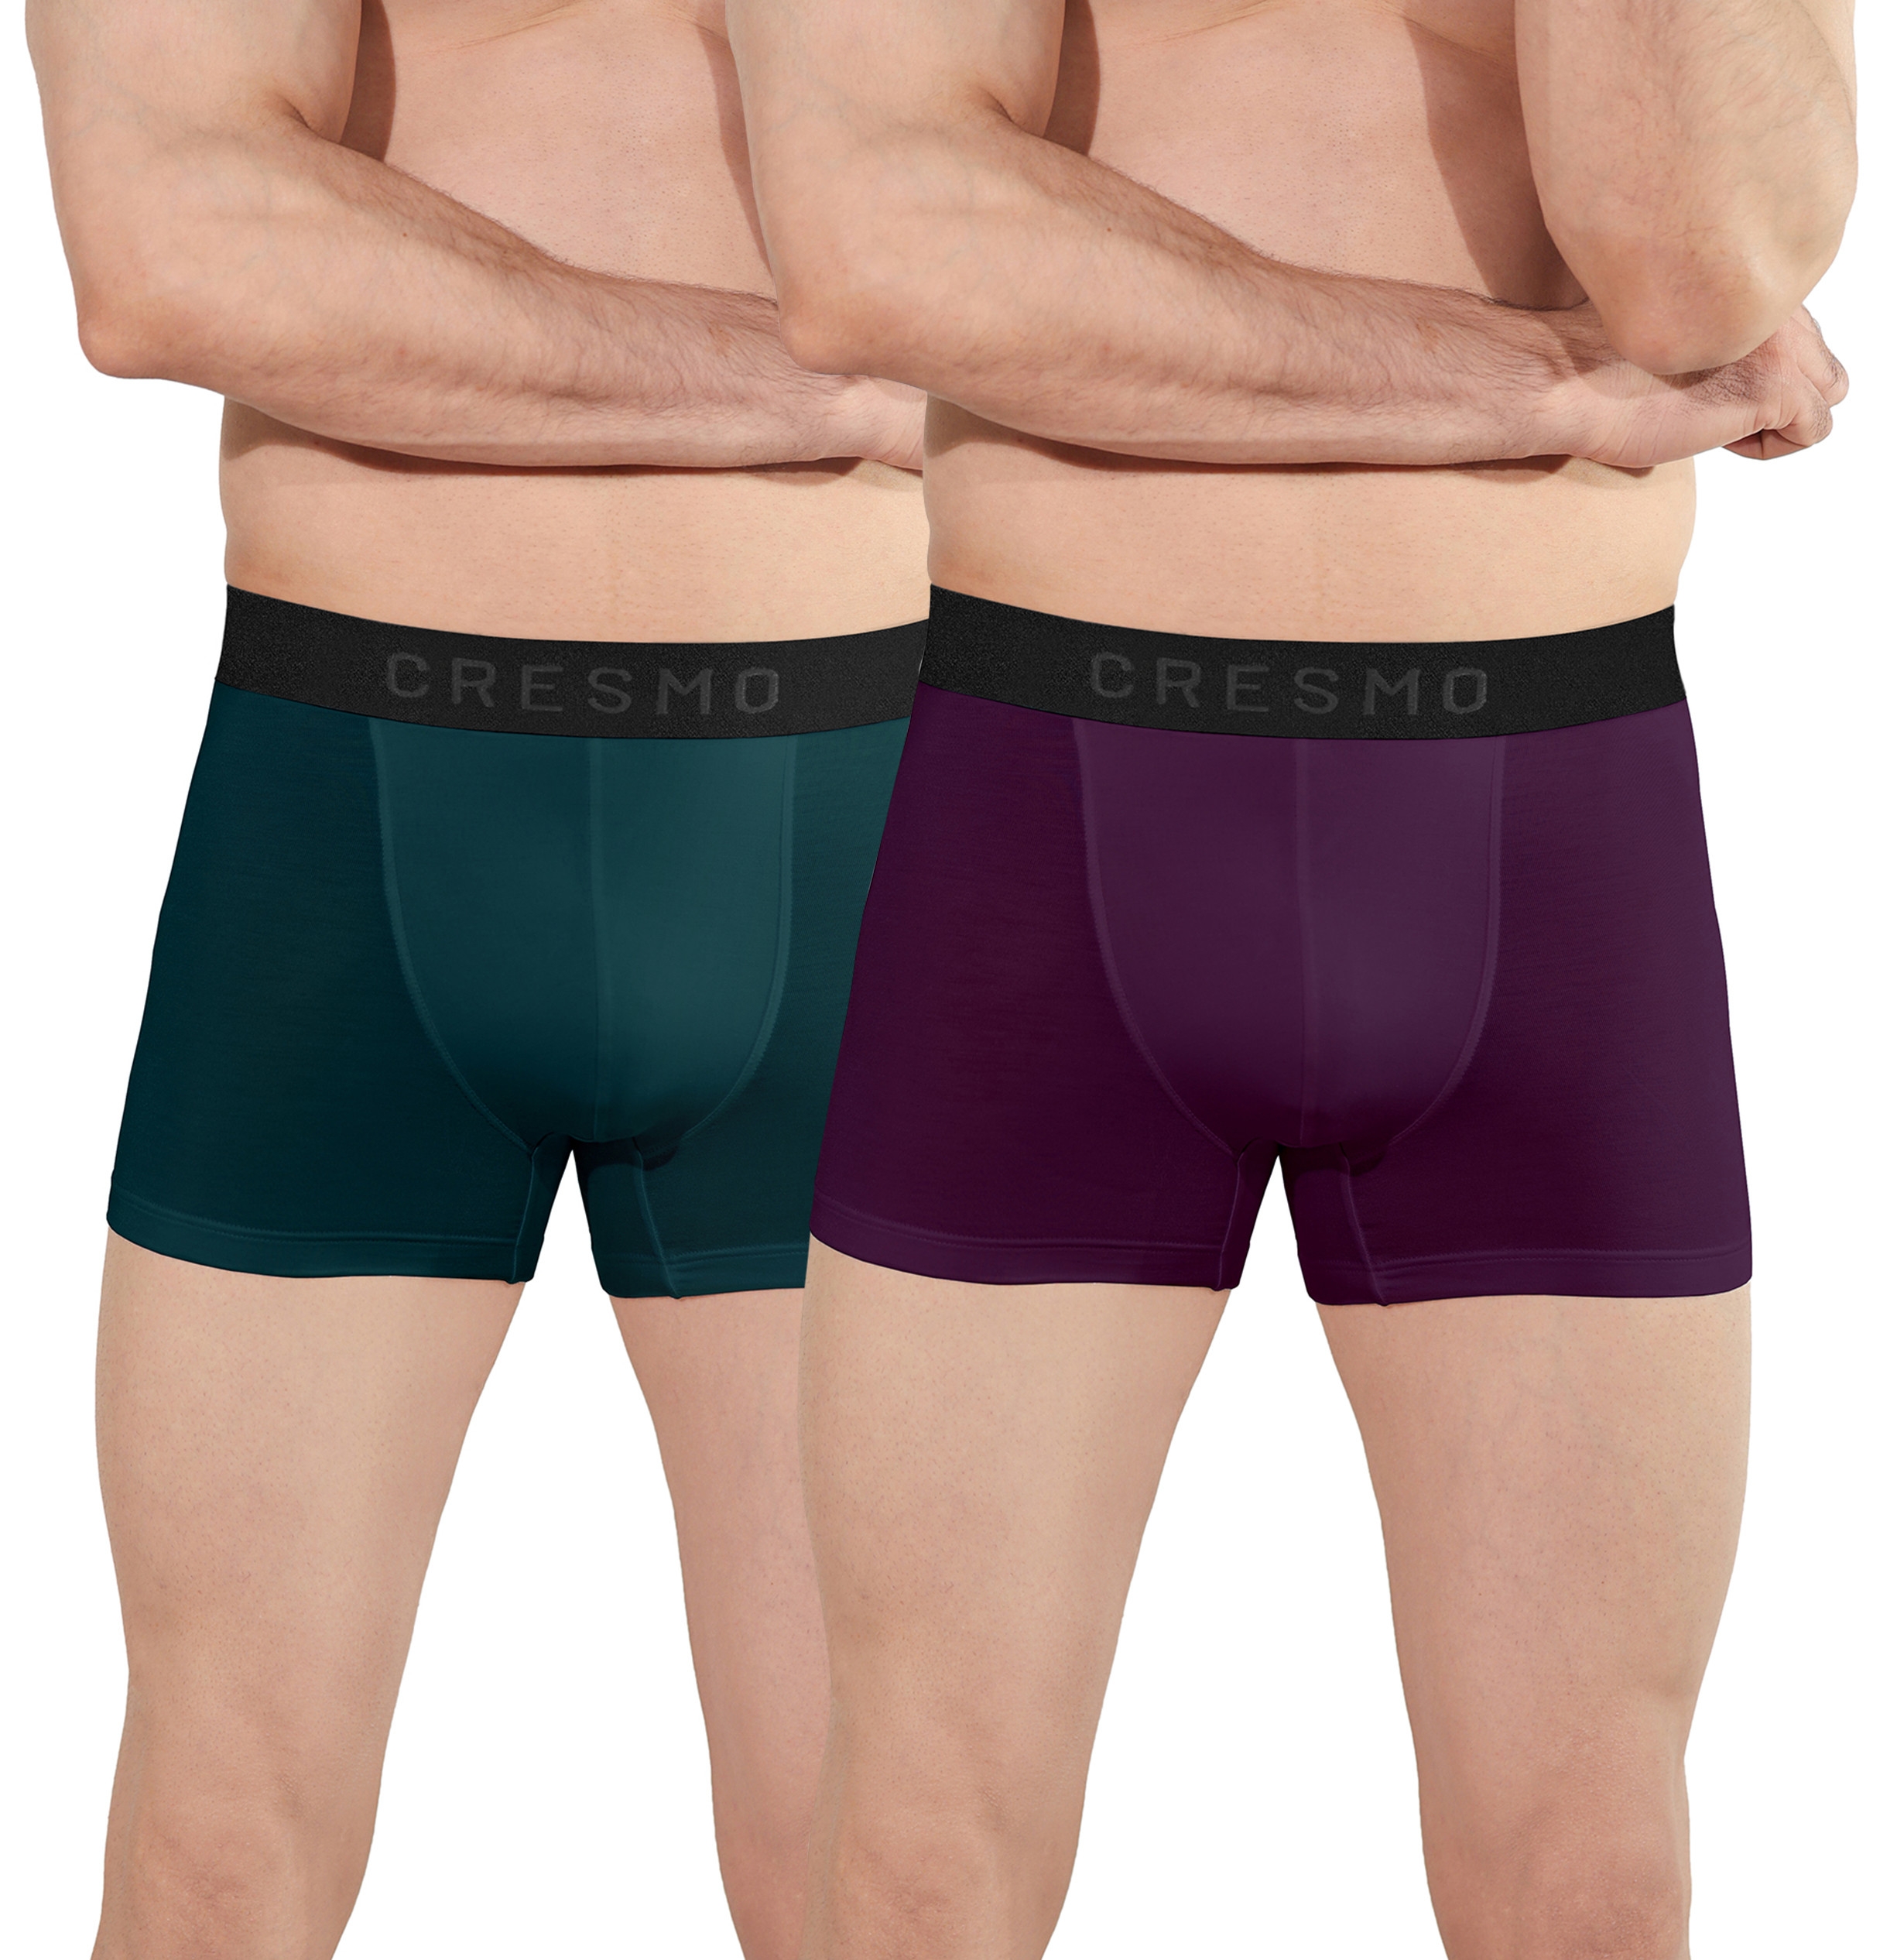 CRESMO | CRESMO Men's Microbial Micro Modal Underwear Breathable Ultra Soft Trunk (Pack Of 2)